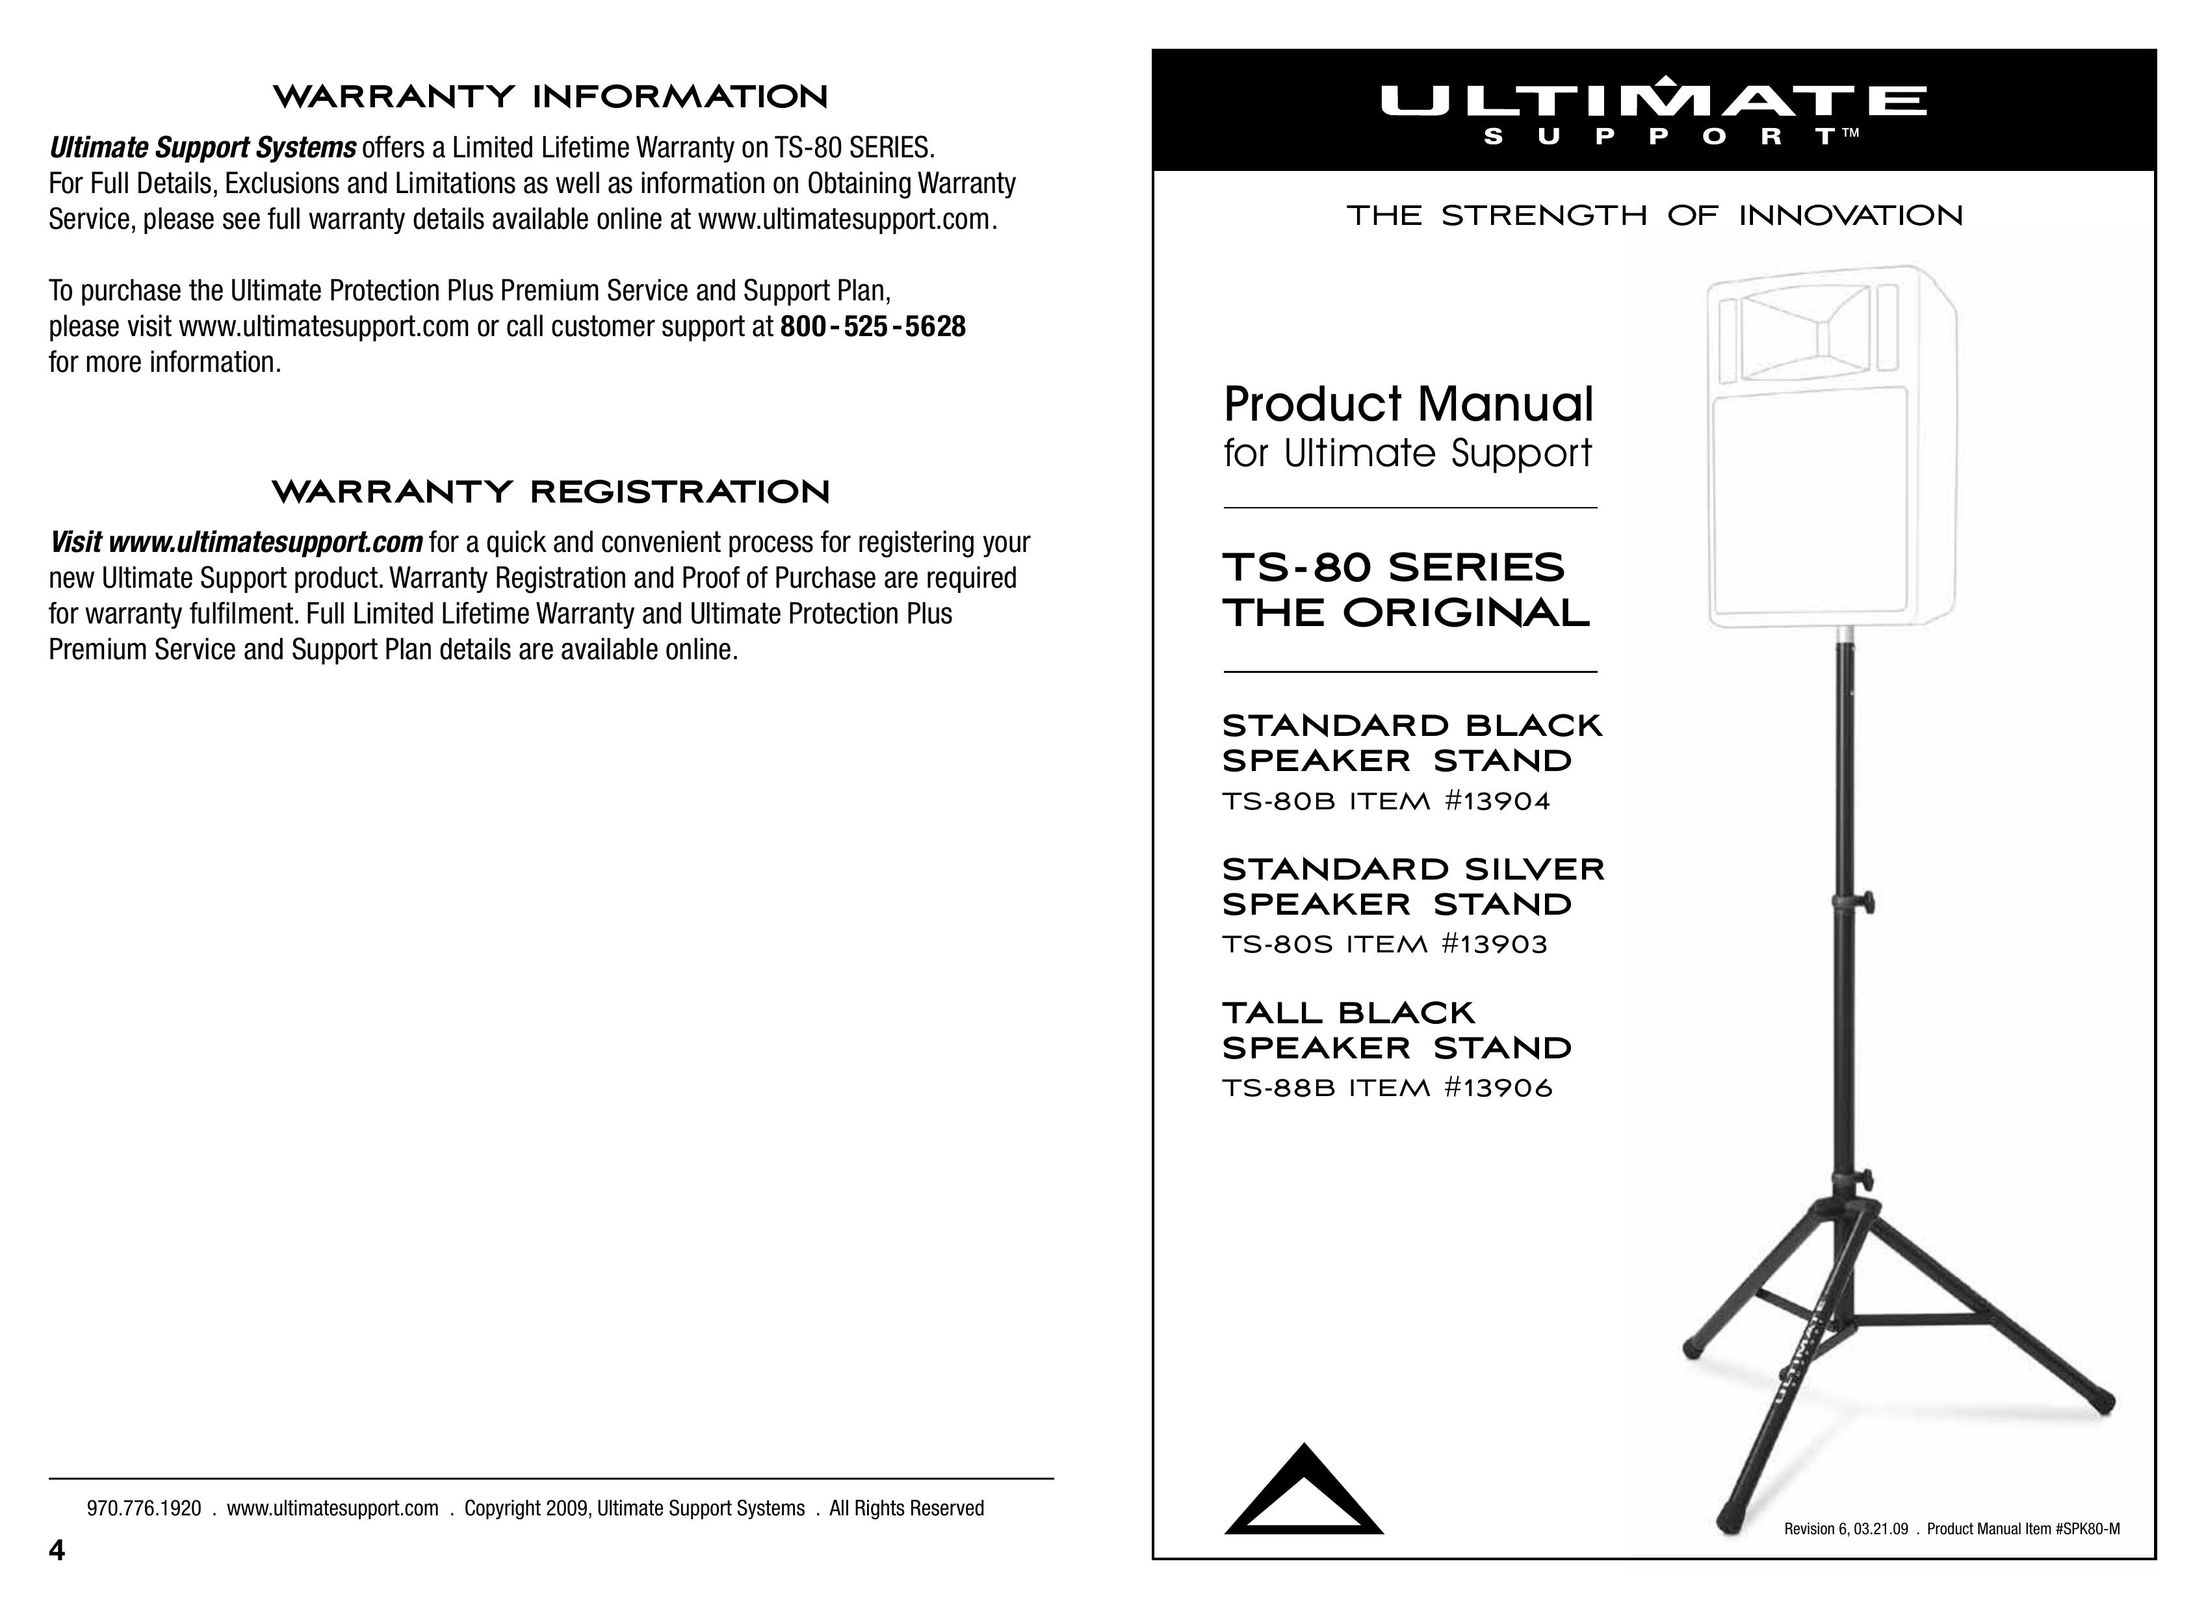 Ultimate Support Systems TS-88B #13906 Speaker System User Manual